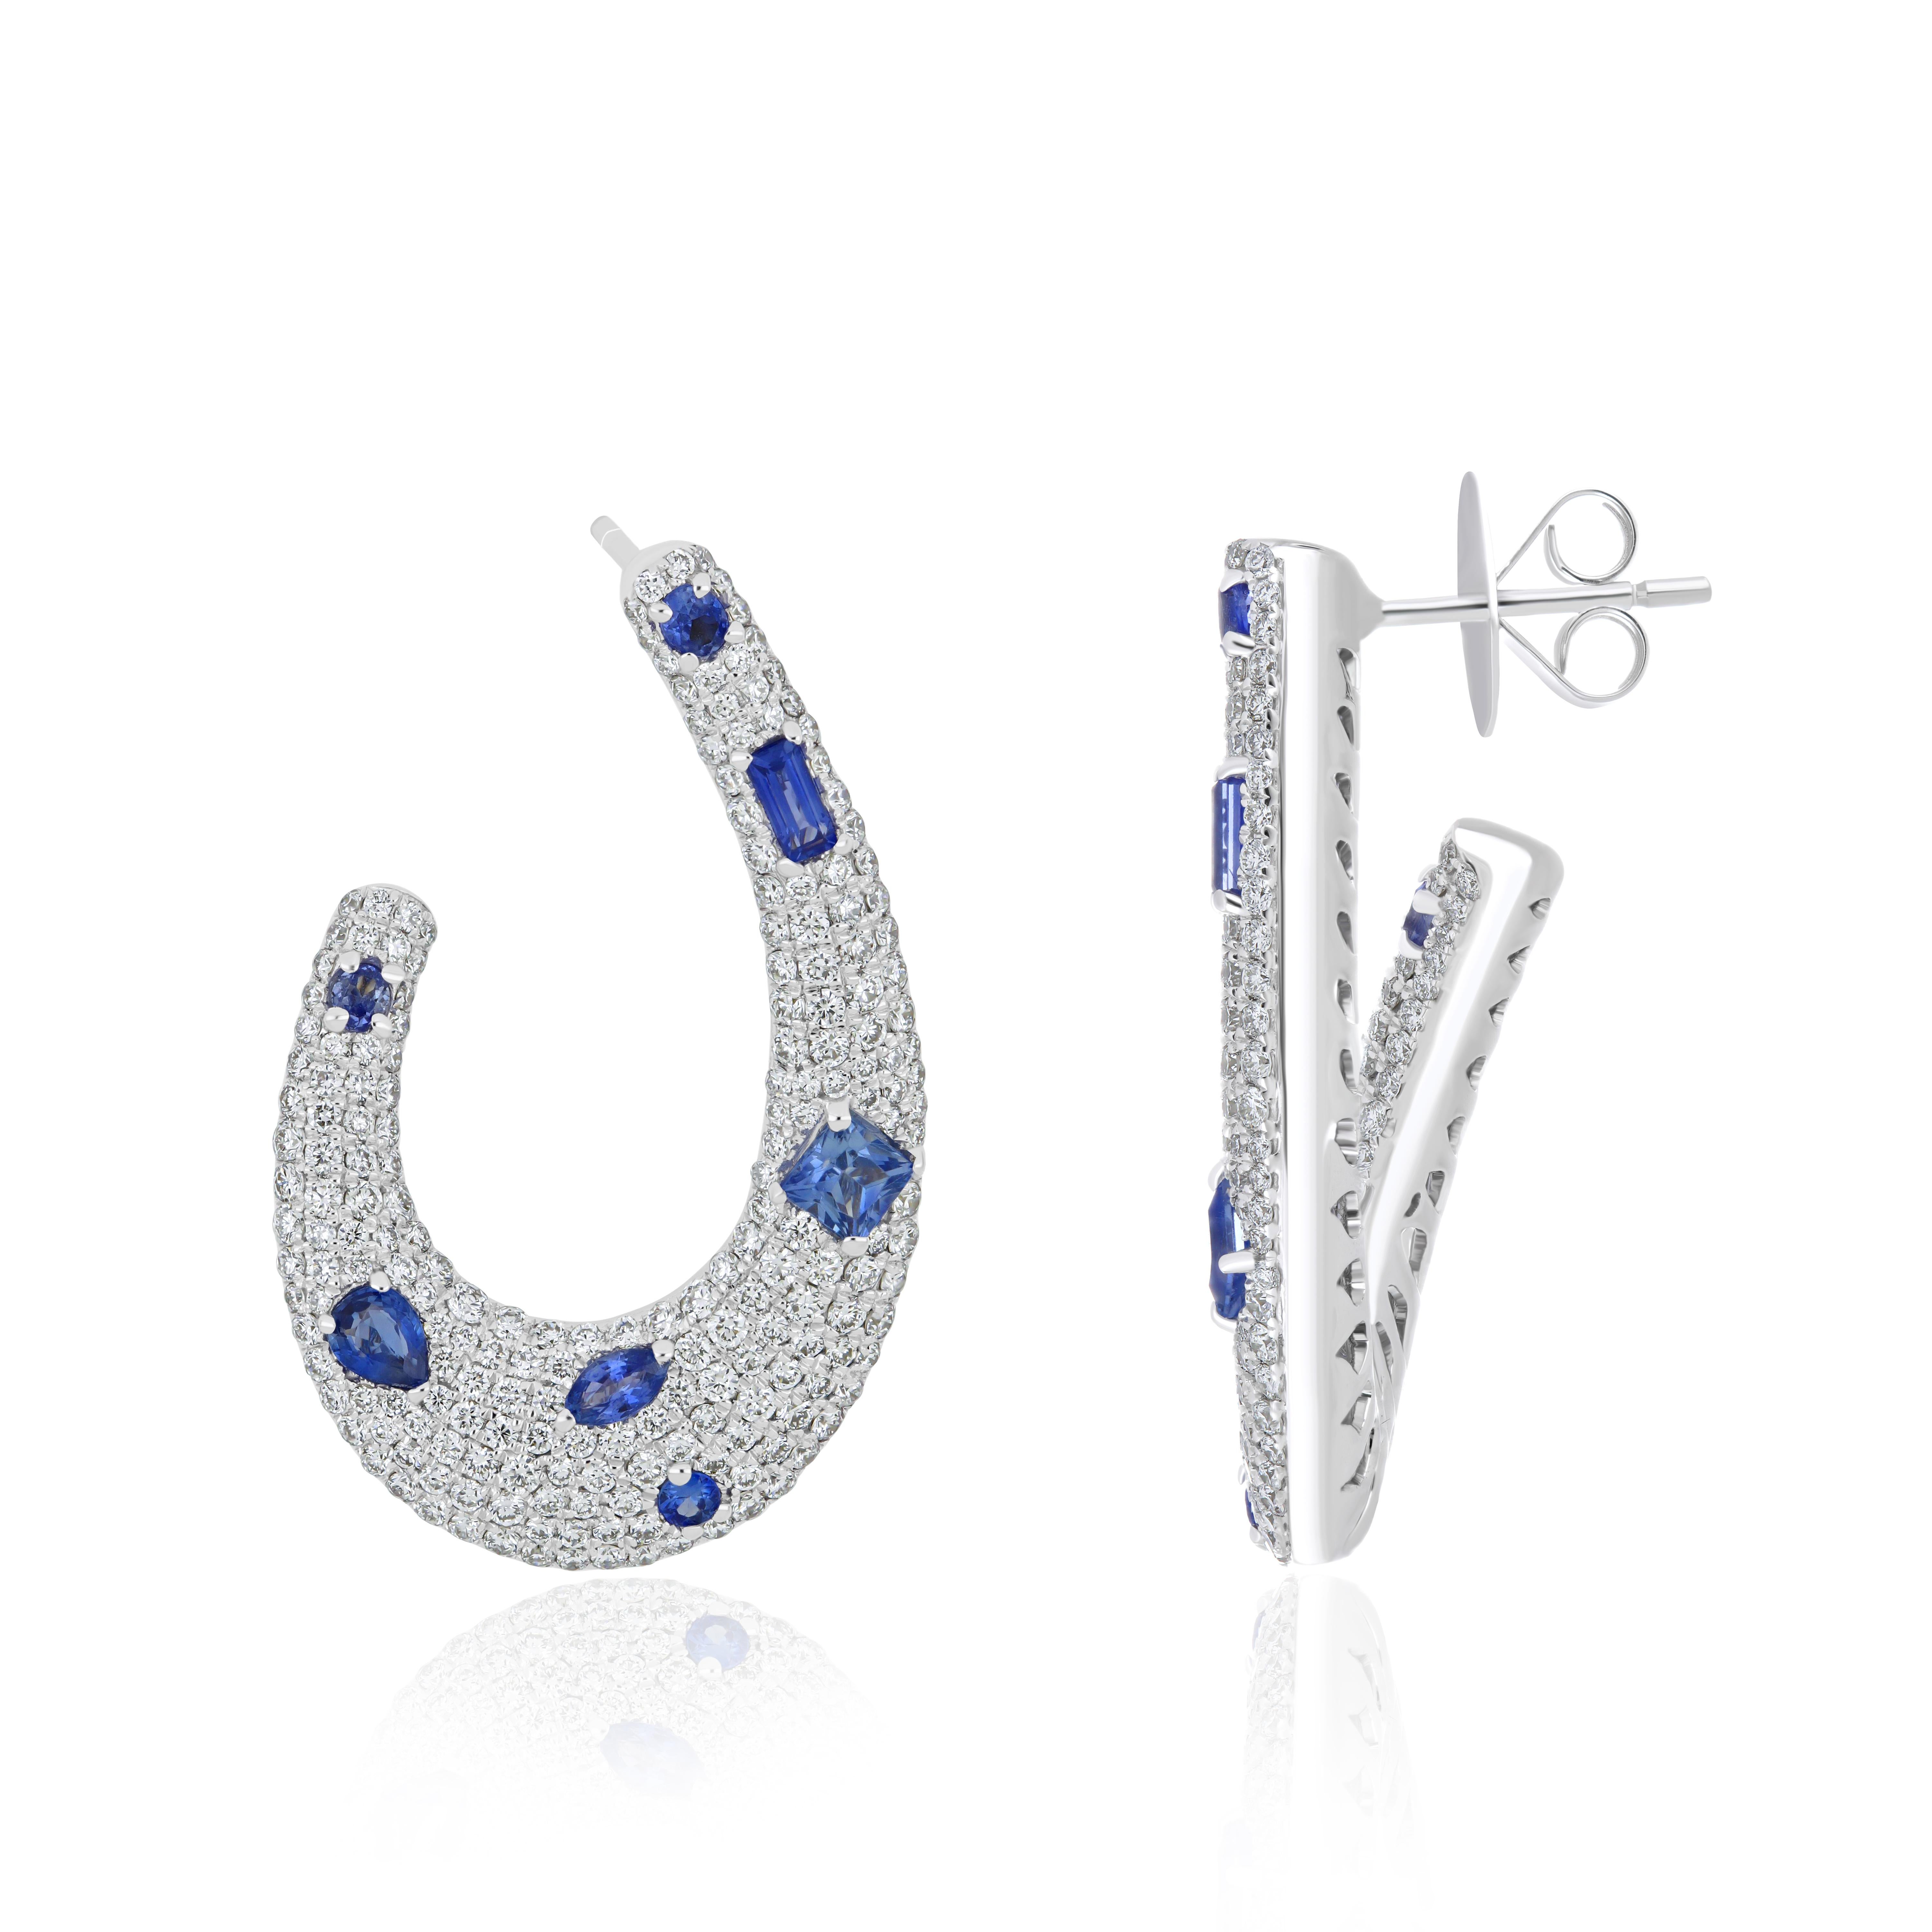 14K Gold Blue Sapphire Studded Earrings for Women with  1.85 Cts (approx. total)  Blue Sapphire  and accented with micro pave Diamonds, weighing approx. 2.41 cts. (approx. total). Beautifully Hand-Crafted Earring in 14 Karat White Gold for your